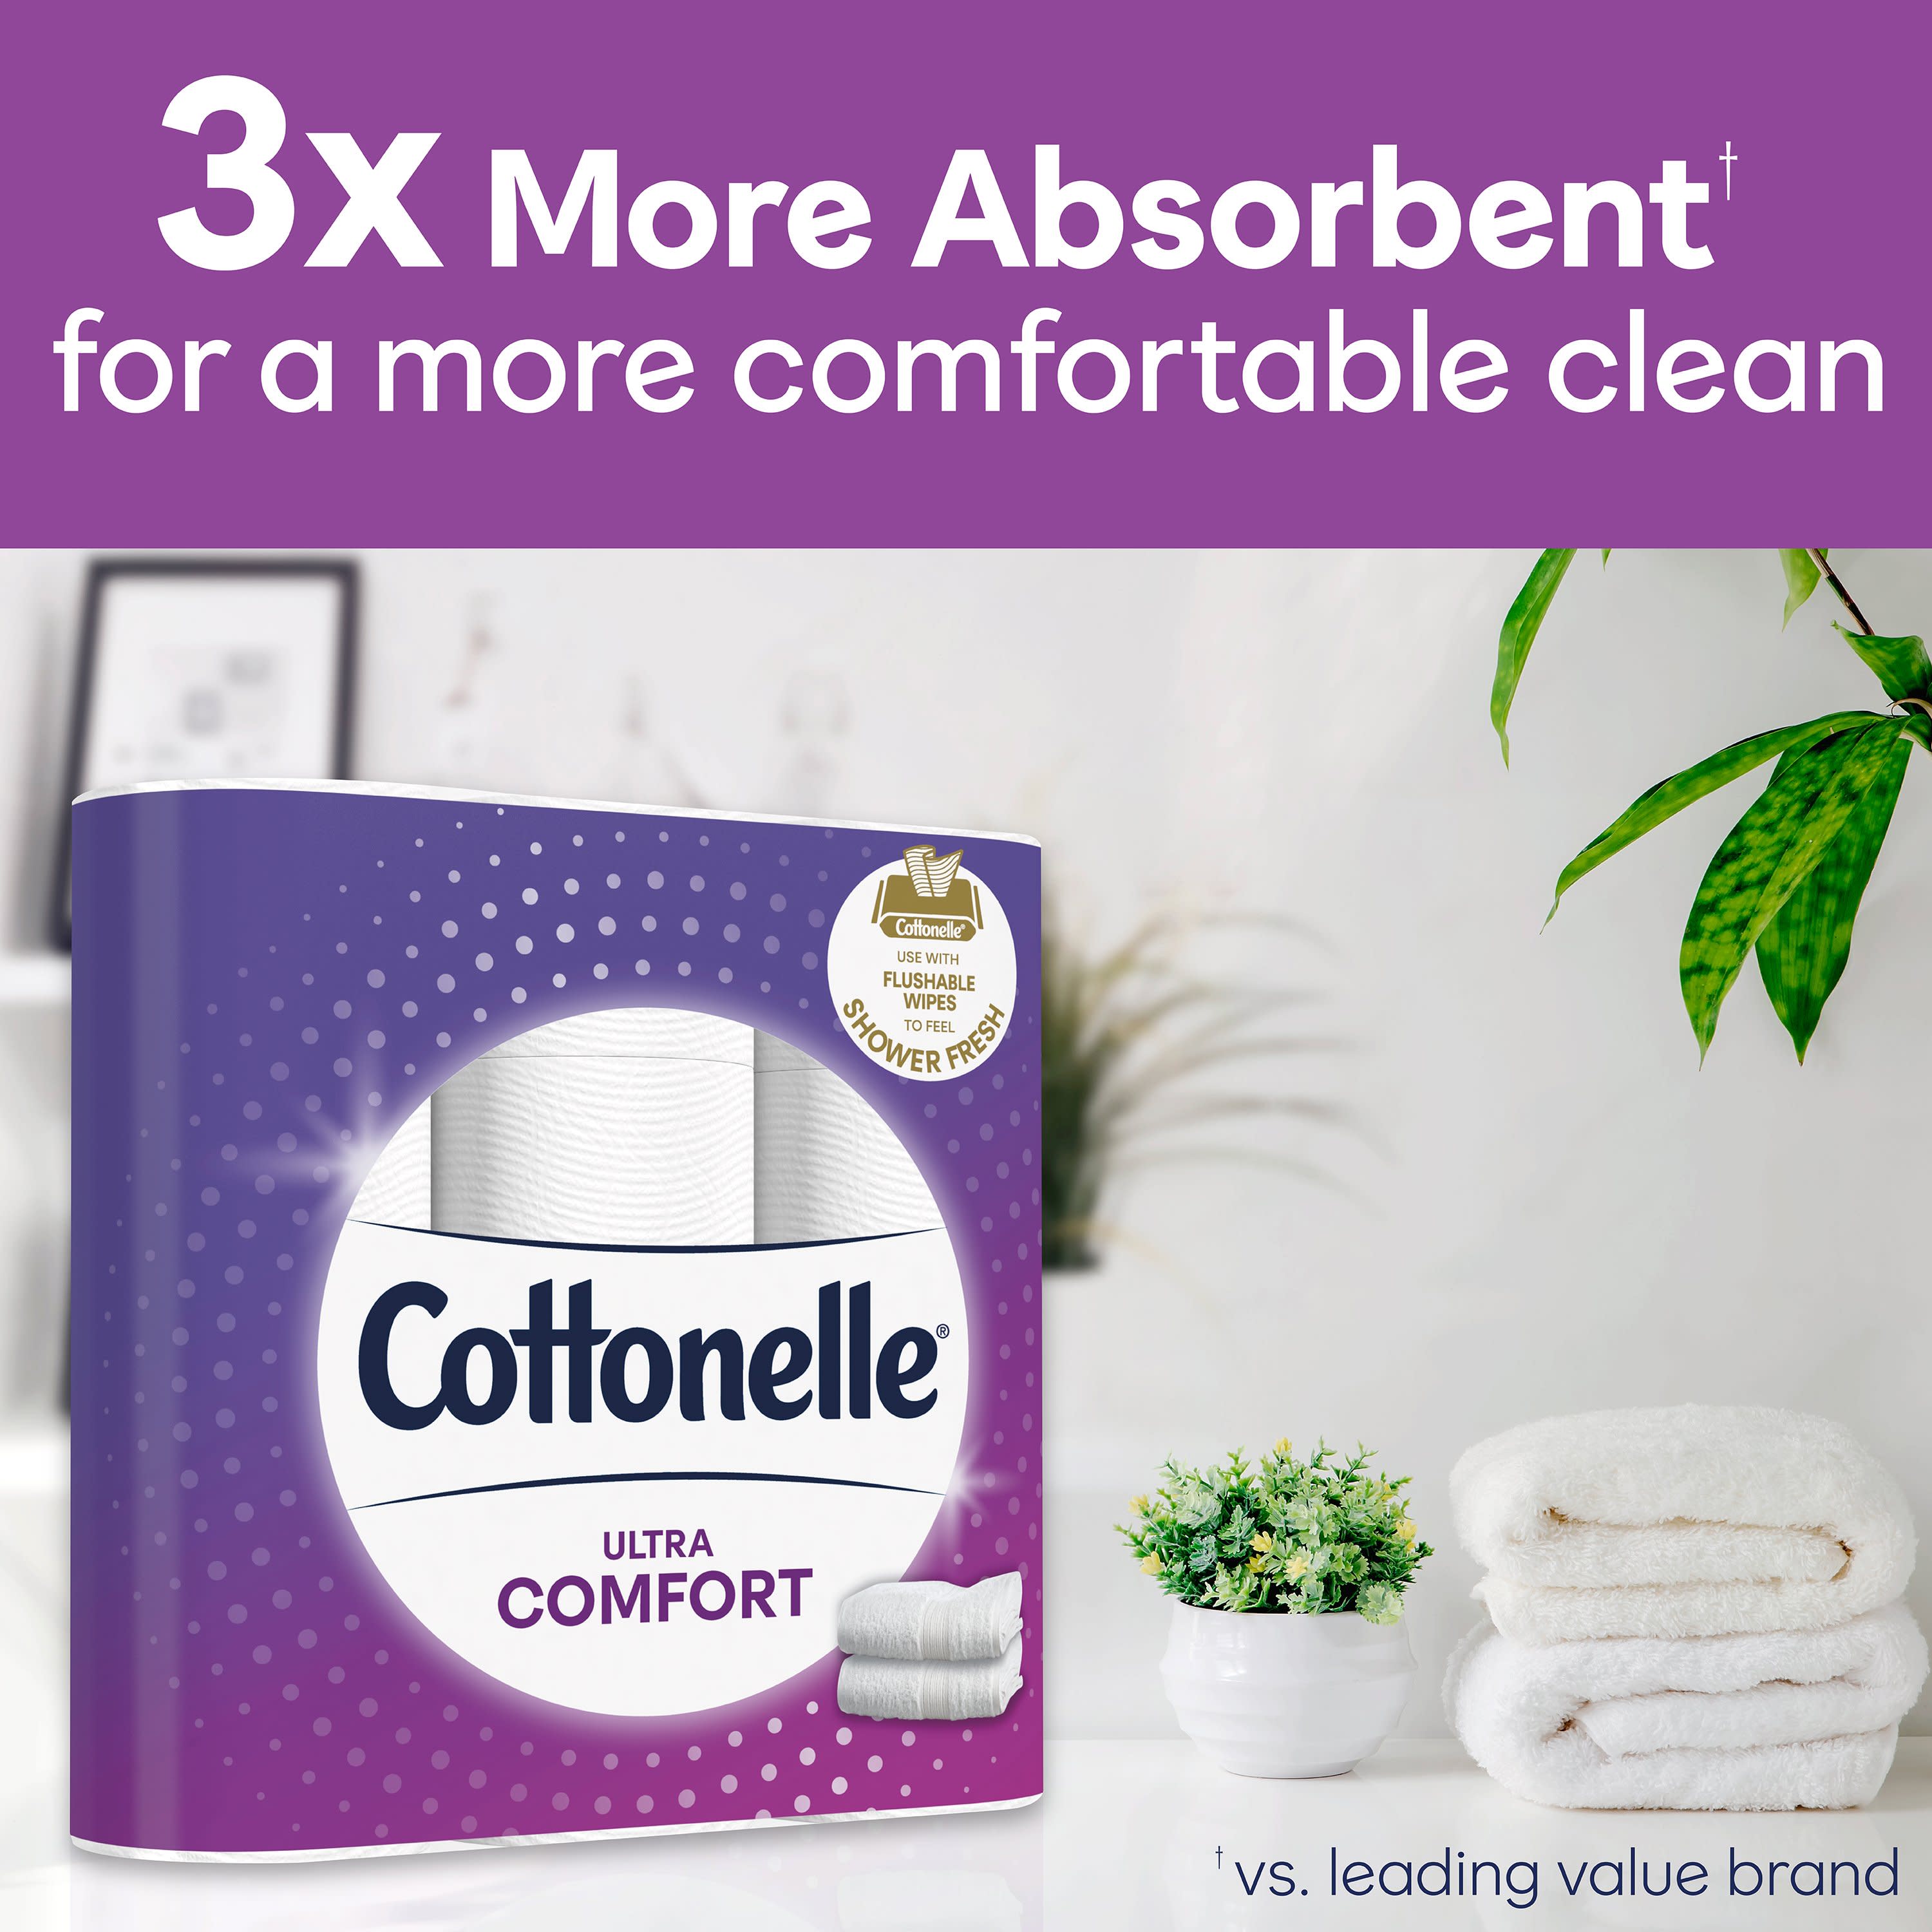 Cottonelle Ultra Comfort Toilet Paper, 12 Double Rolls, 154 Sheets per Roll (1,848 Total) - image 4 of 9